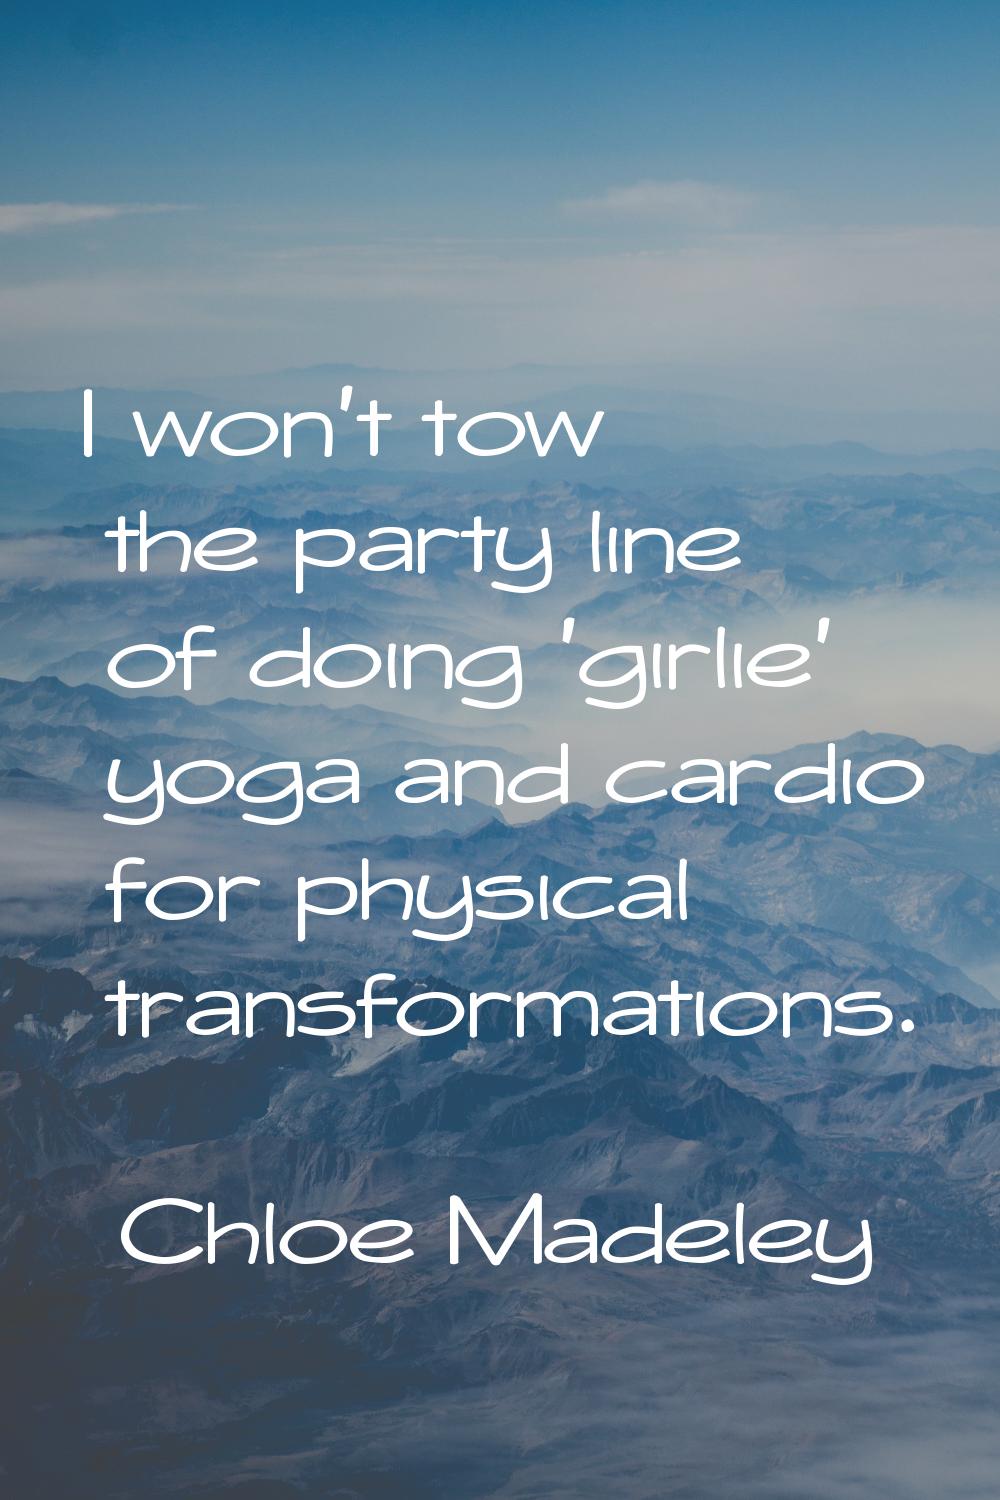 I won't tow the party line of doing 'girlie' yoga and cardio for physical transformations.